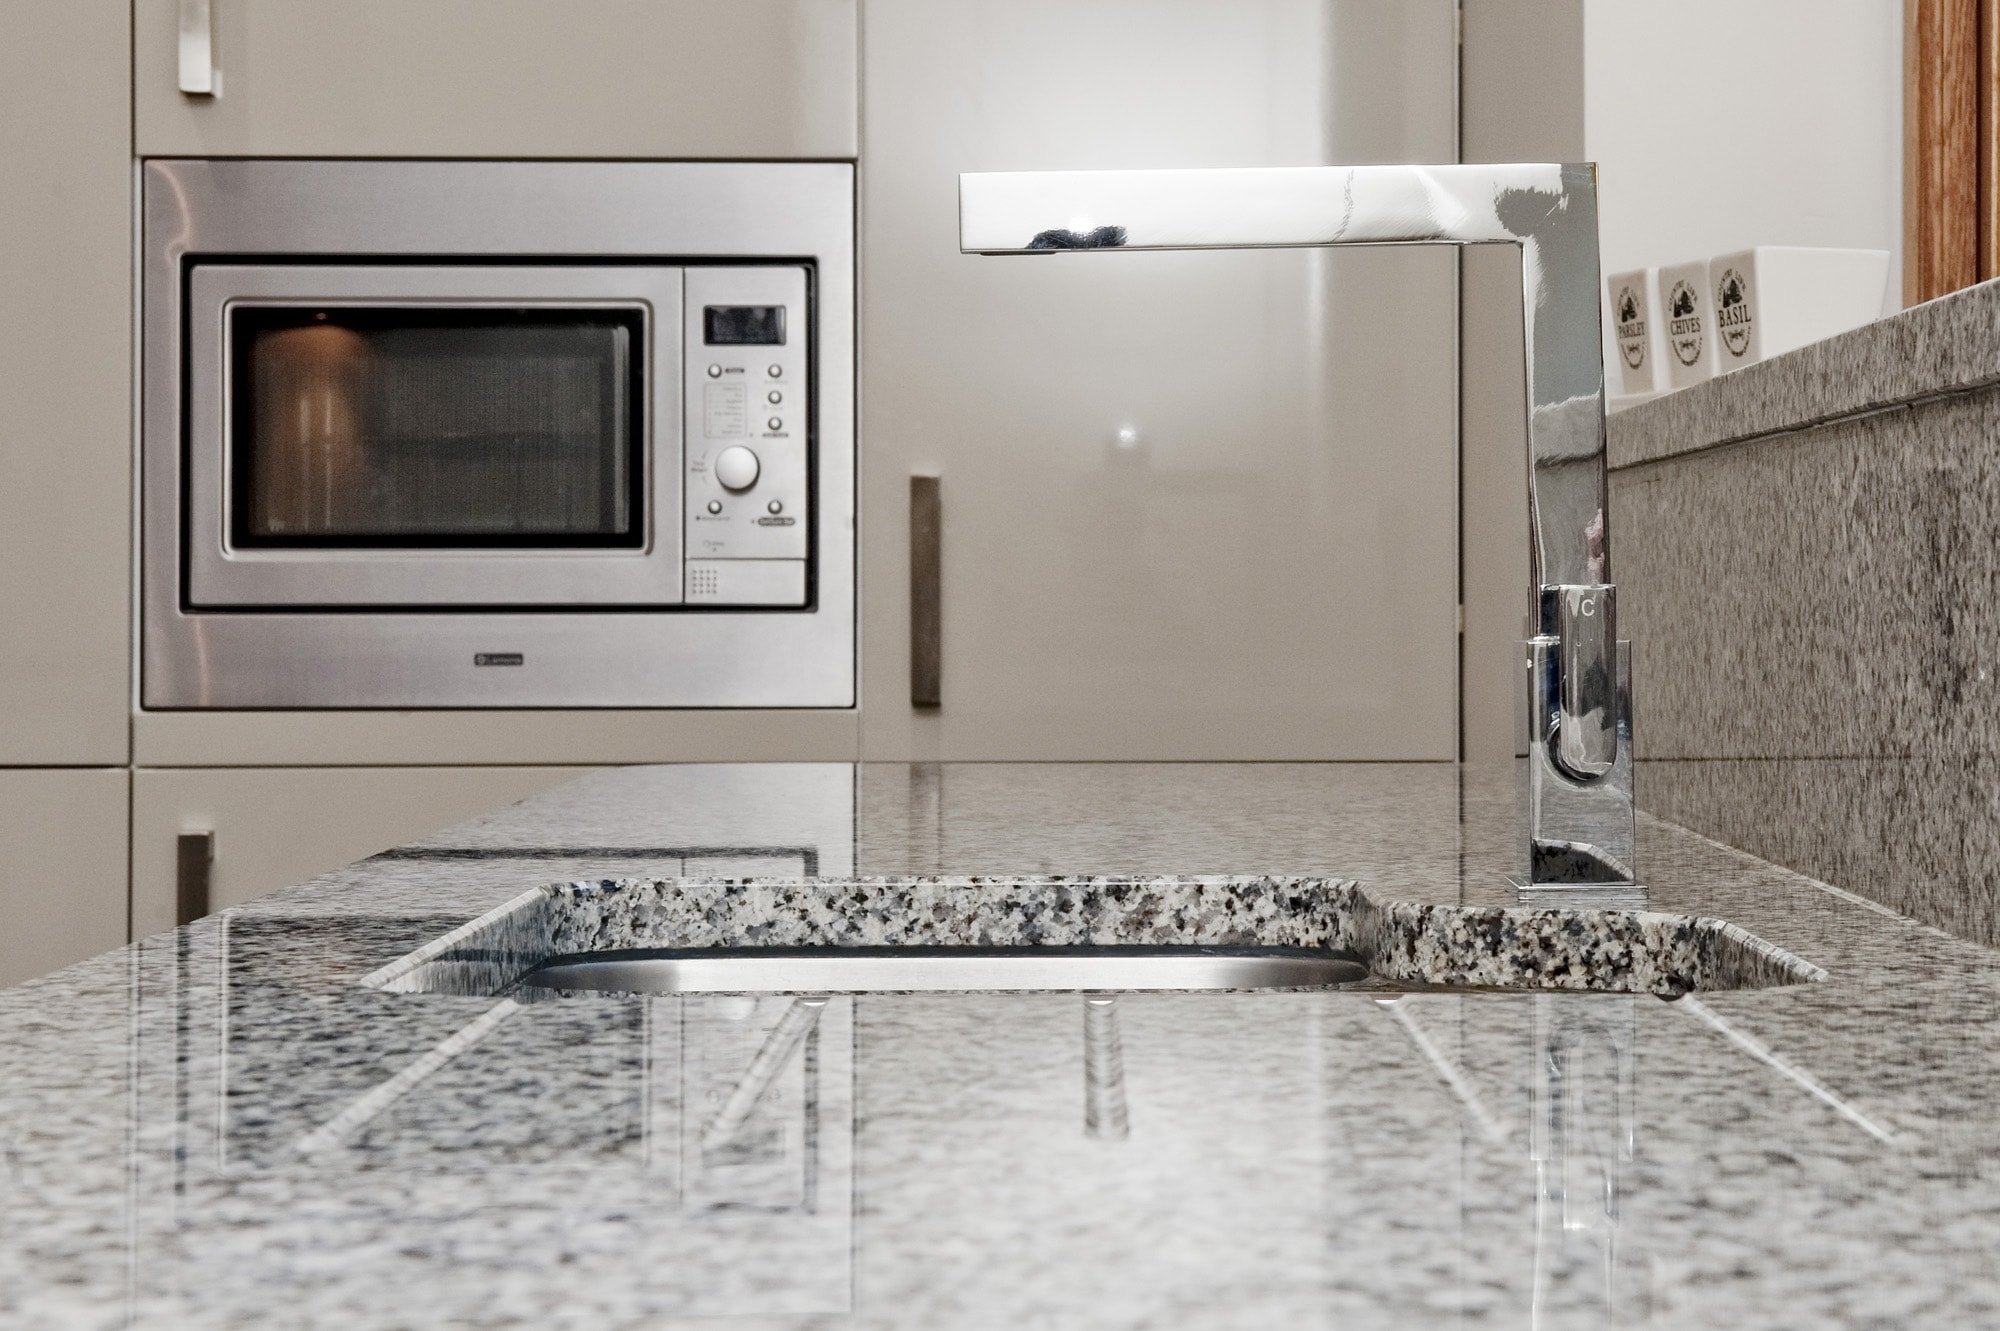 azul-platino-granite-east-grinstead-122700-a-sink-and-tap-min